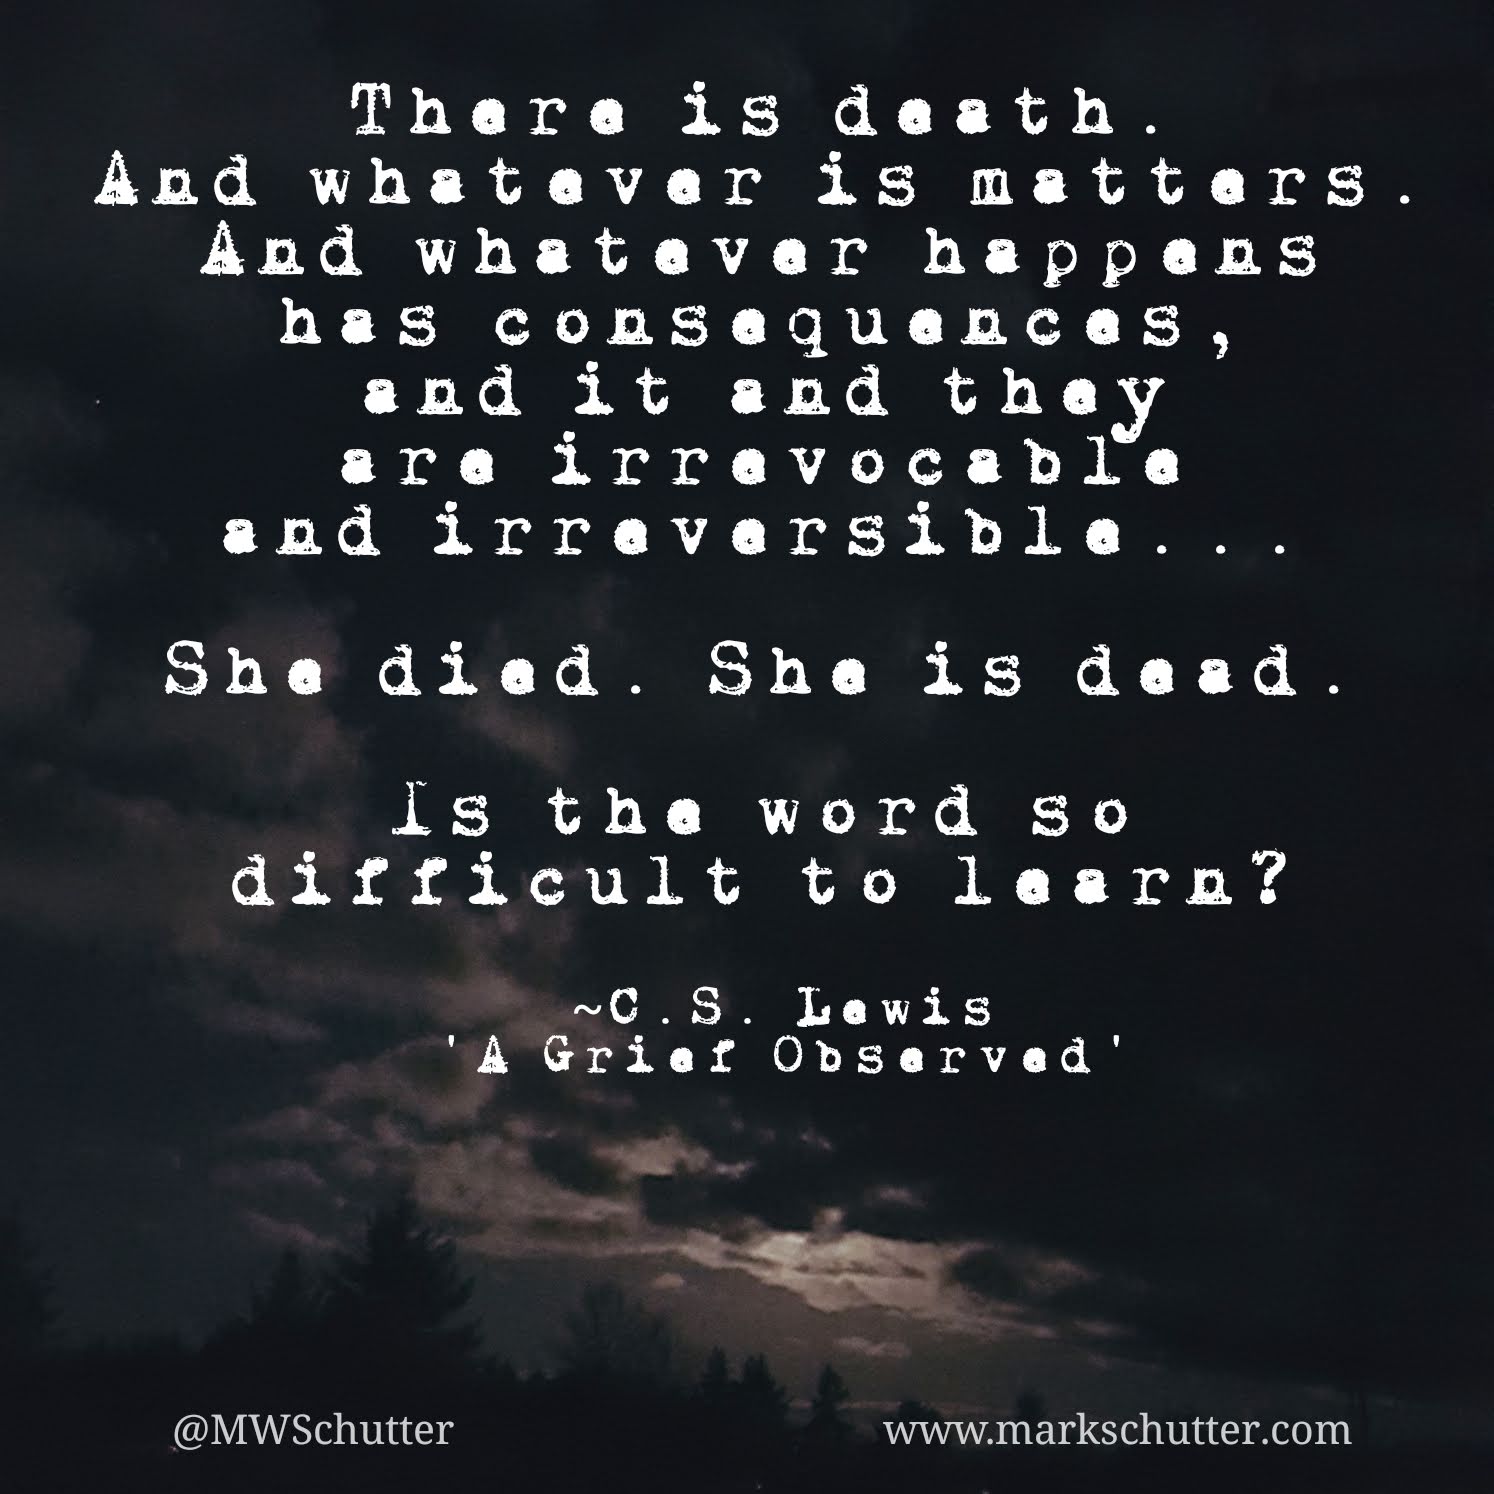 “She died. She is dead.” Thoughts and coming to terms with the words.